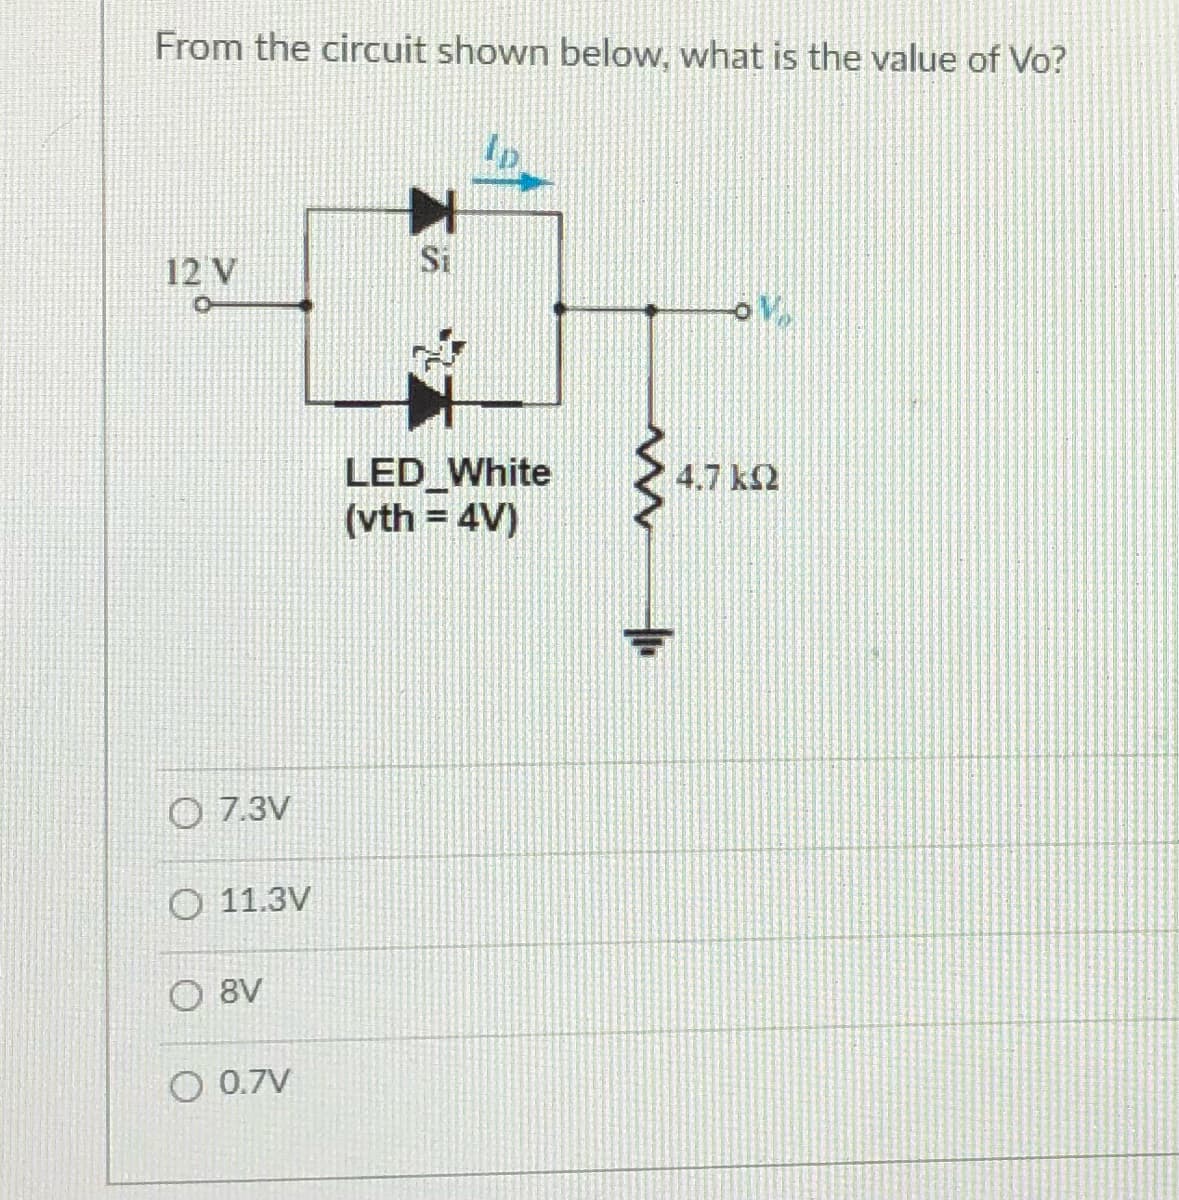 From the circuit shown below, what is the value of Vo?
12 V
Si
LED White
(vth = 4V)
4.7 k2
%3D
O 7.3V
O 11.3V
O 8V
O 0.7V
